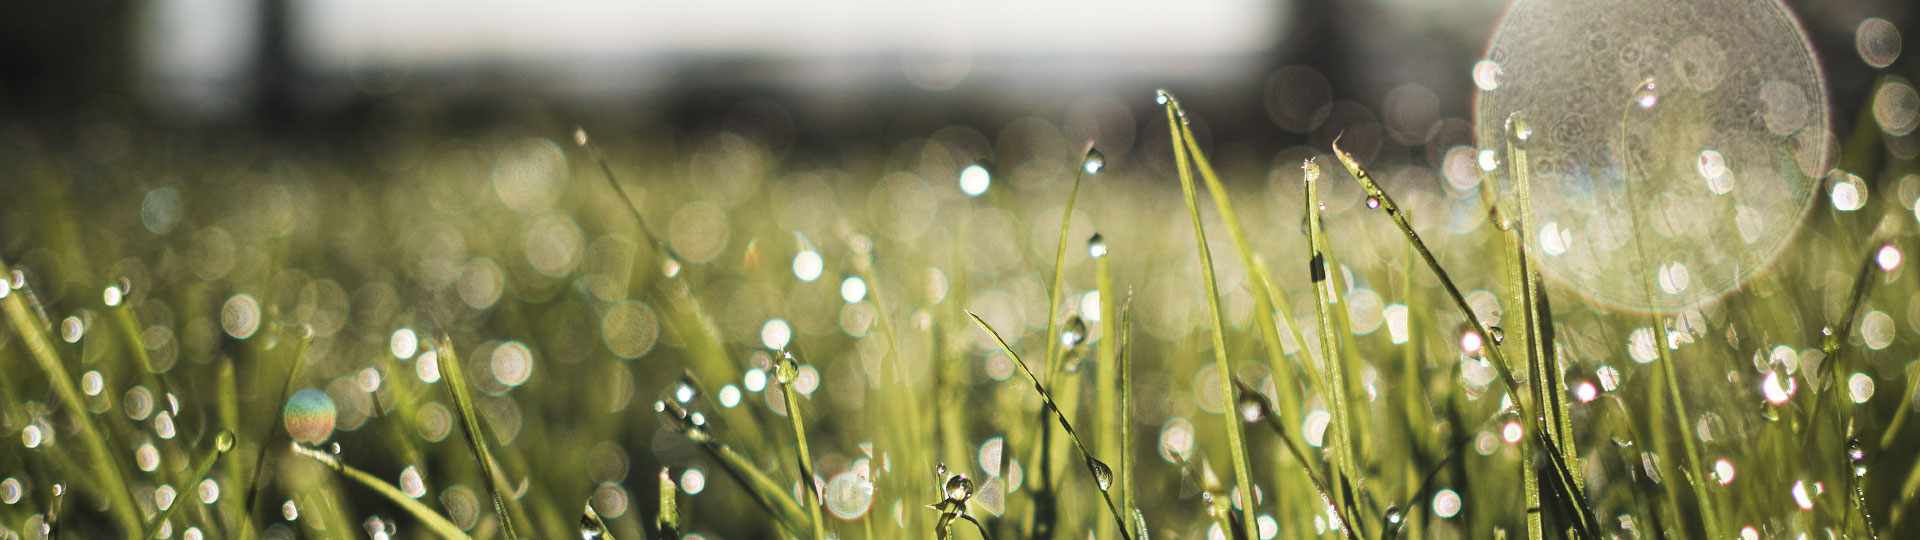 A field of grass covered in dew